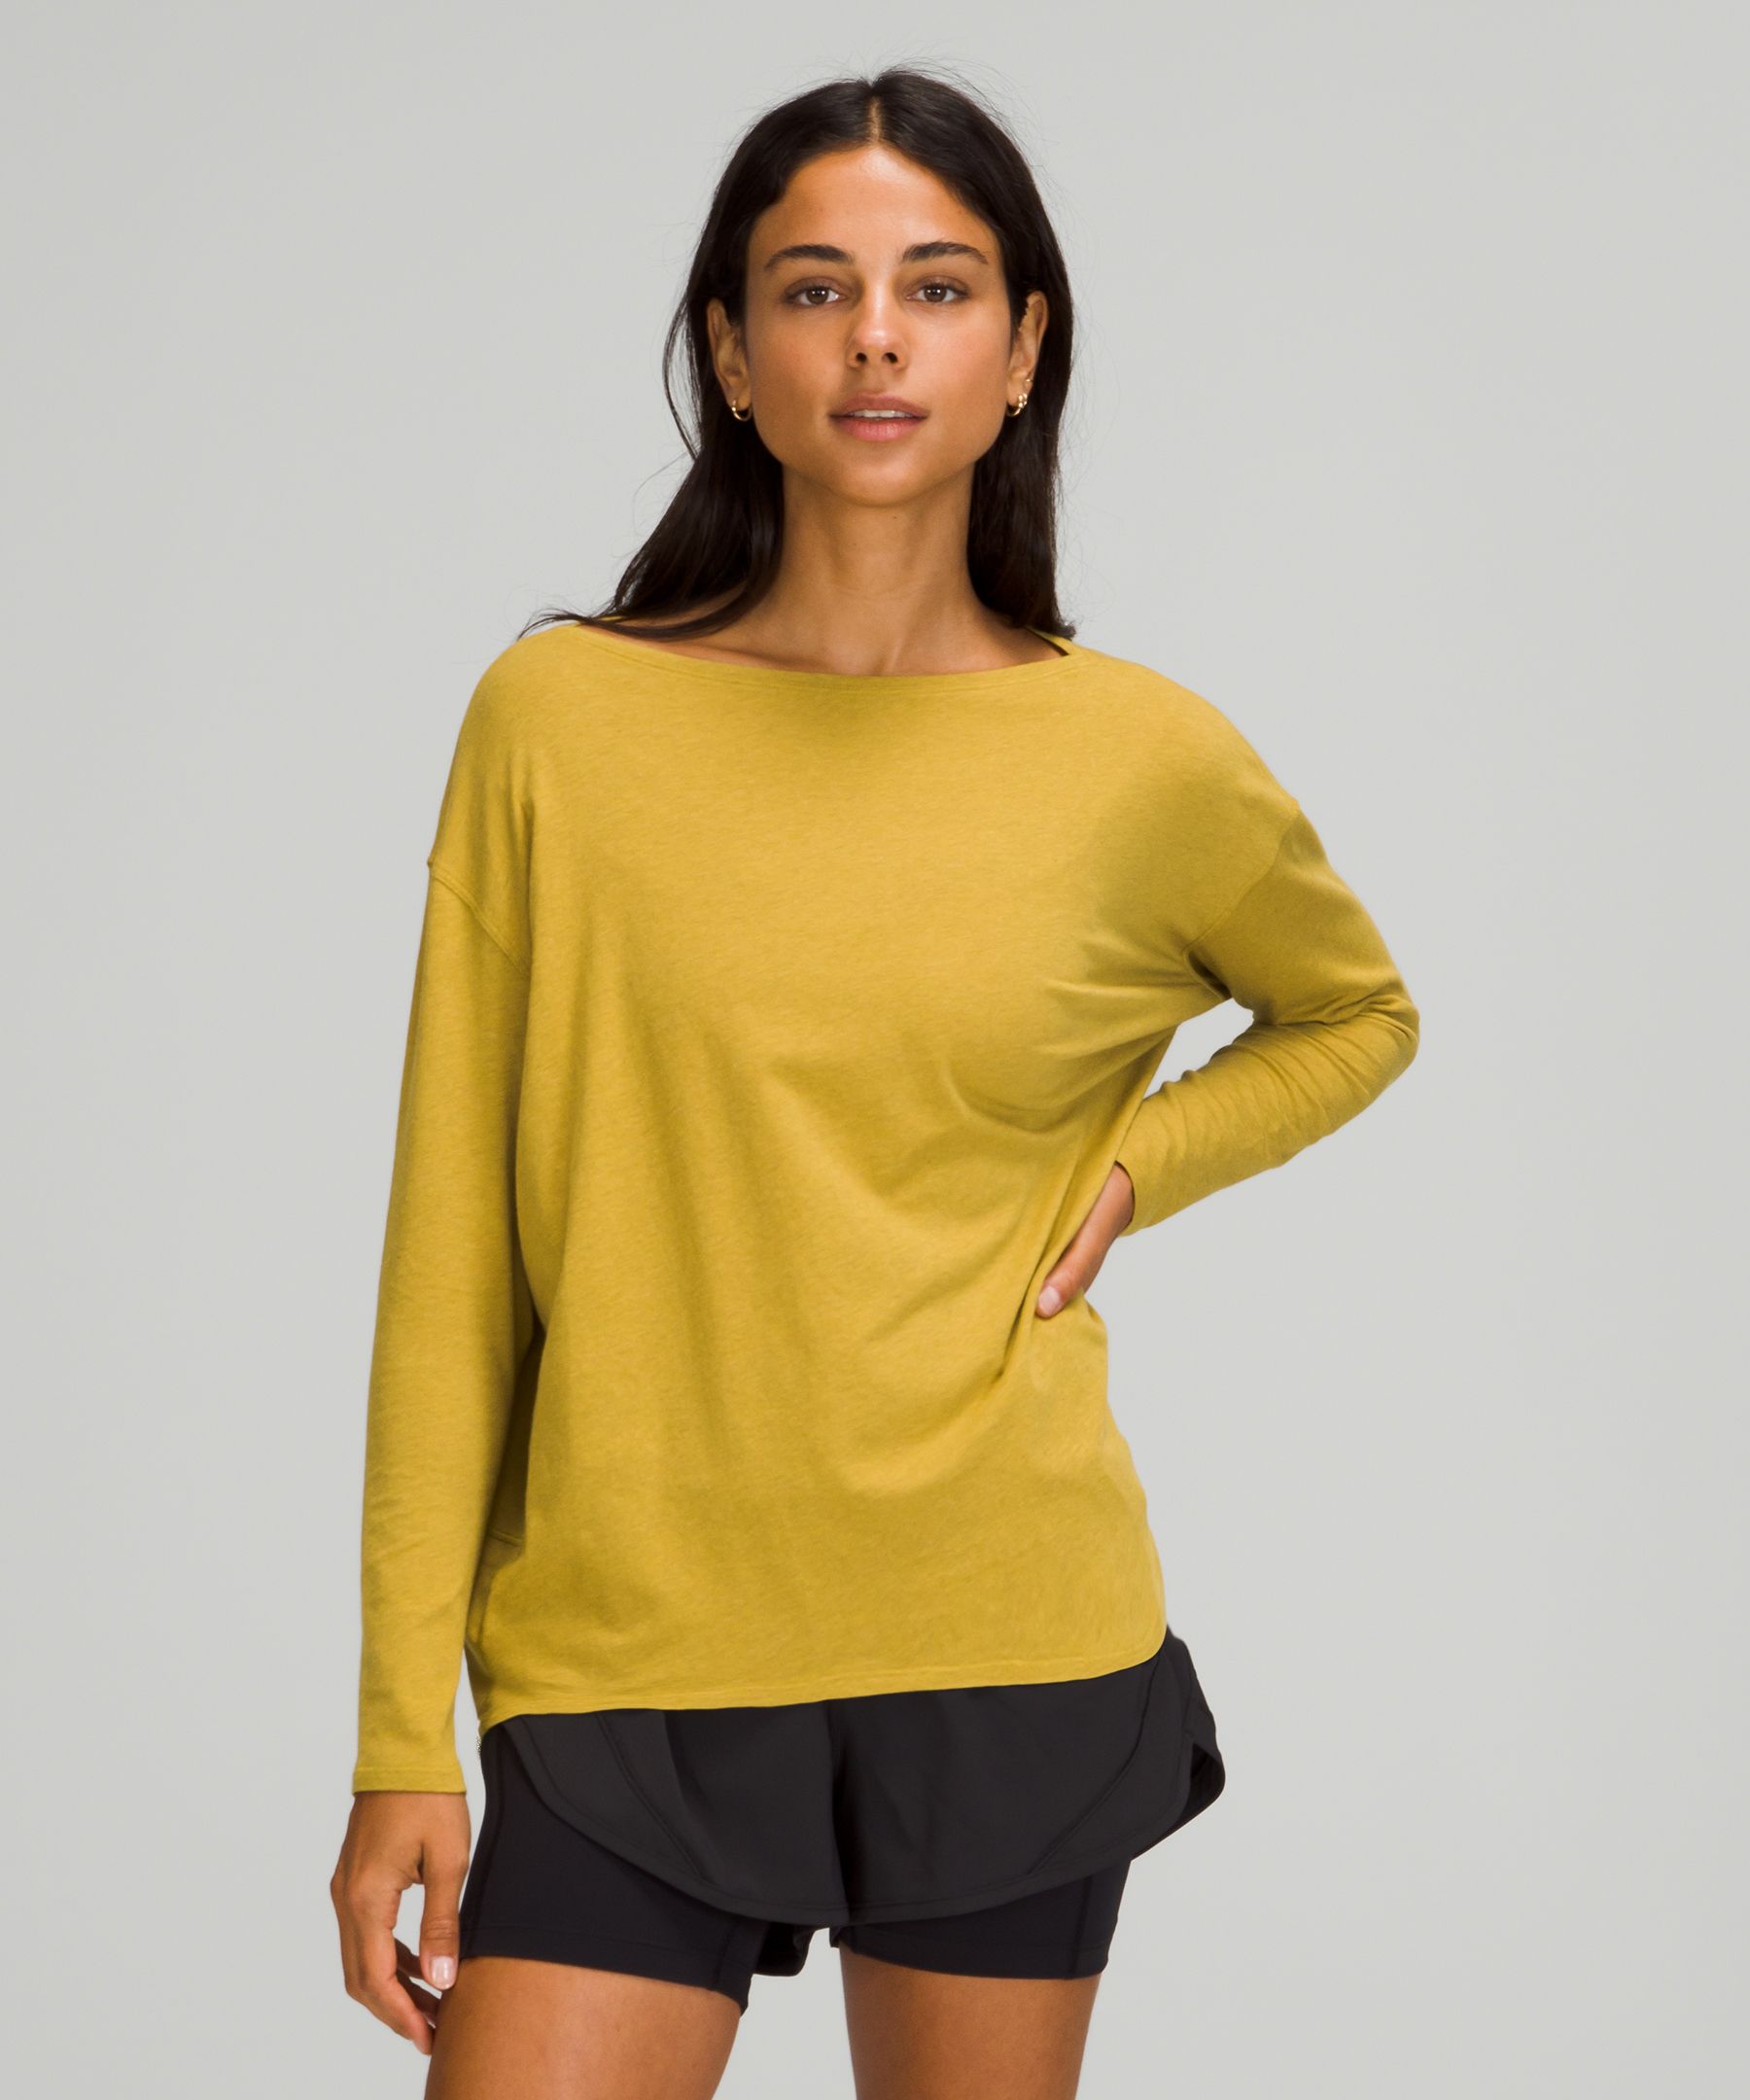 Lululemon Back In Action Long Sleeve Shirt In Heathered Auric Gold